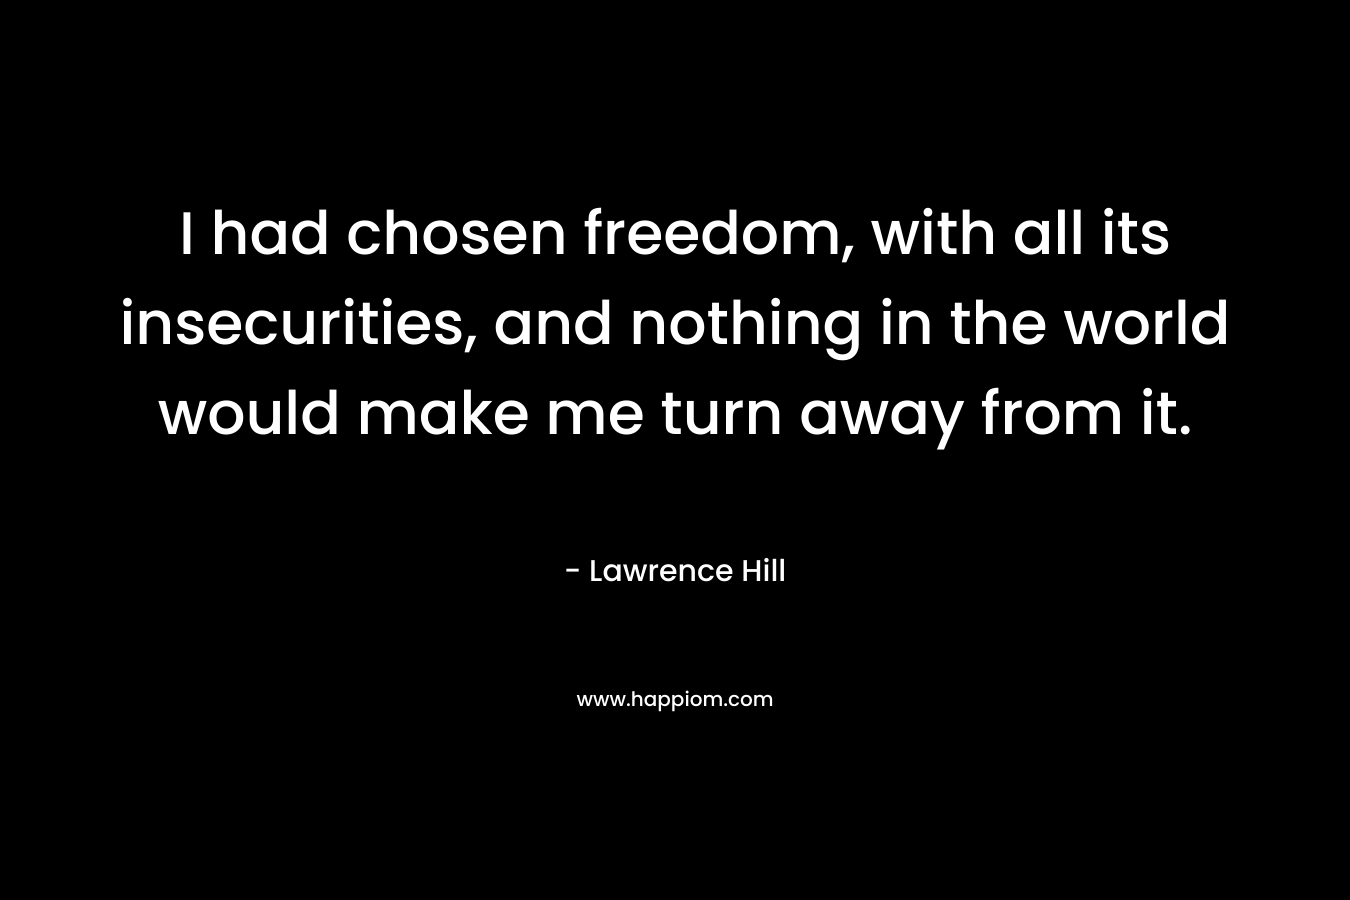 I had chosen freedom, with all its insecurities, and nothing in the world would make me turn away from it. – Lawrence Hill